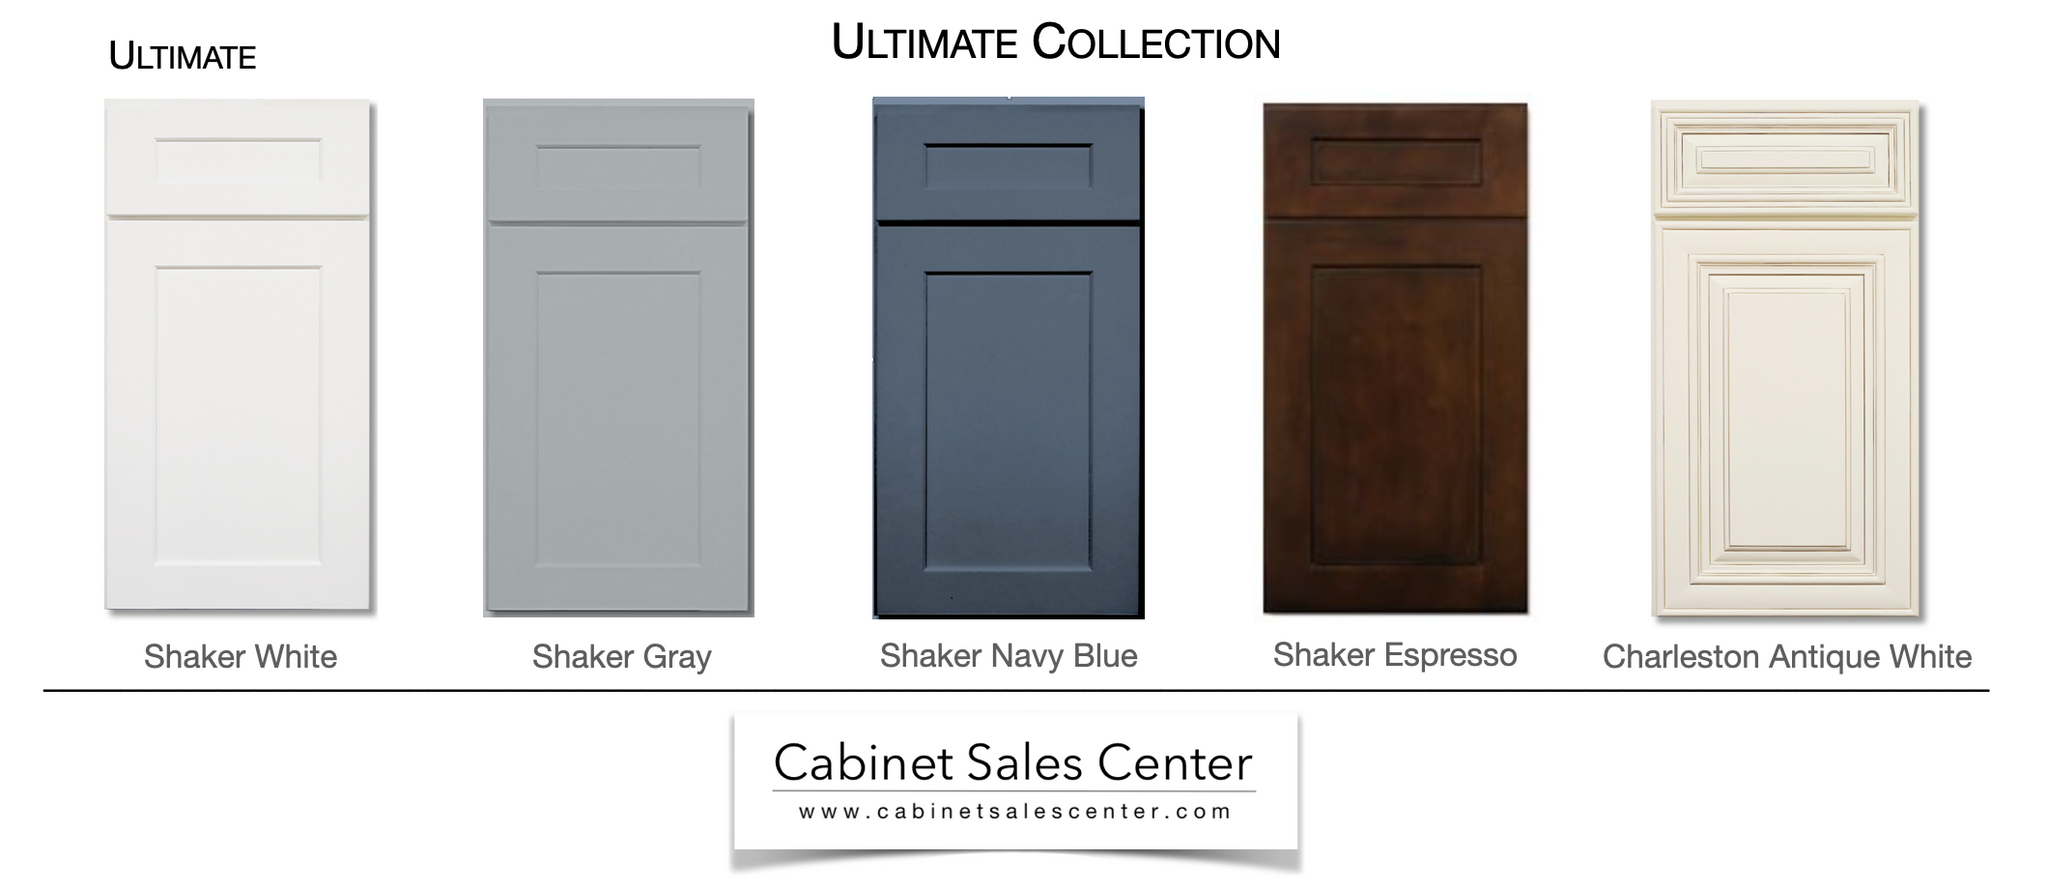 Ultimate kitchen cabinet collection Sample Doors